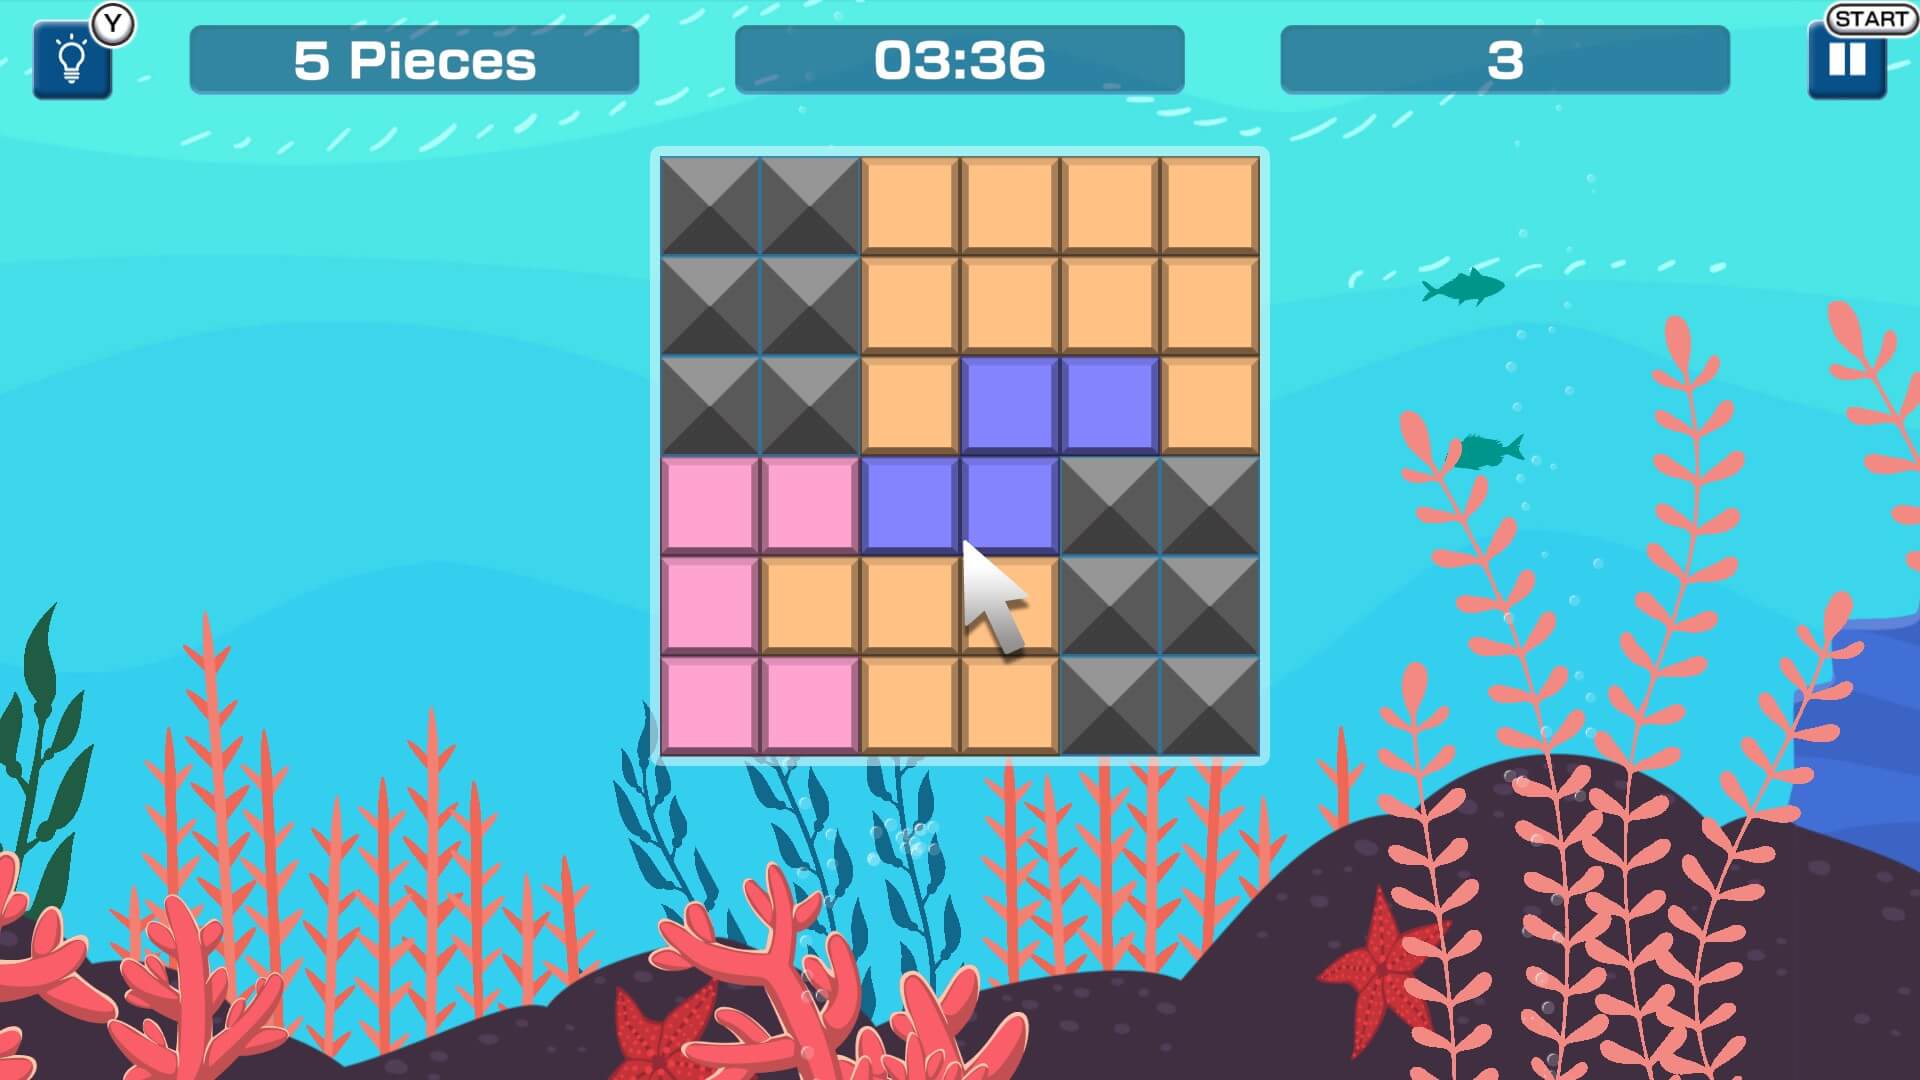 An example SETTRIS board is shown - A cube with gray blocks in the upper left and bottom right with the other areas filled in with orange, pink, and purple blocks. A coral reef composes the background.